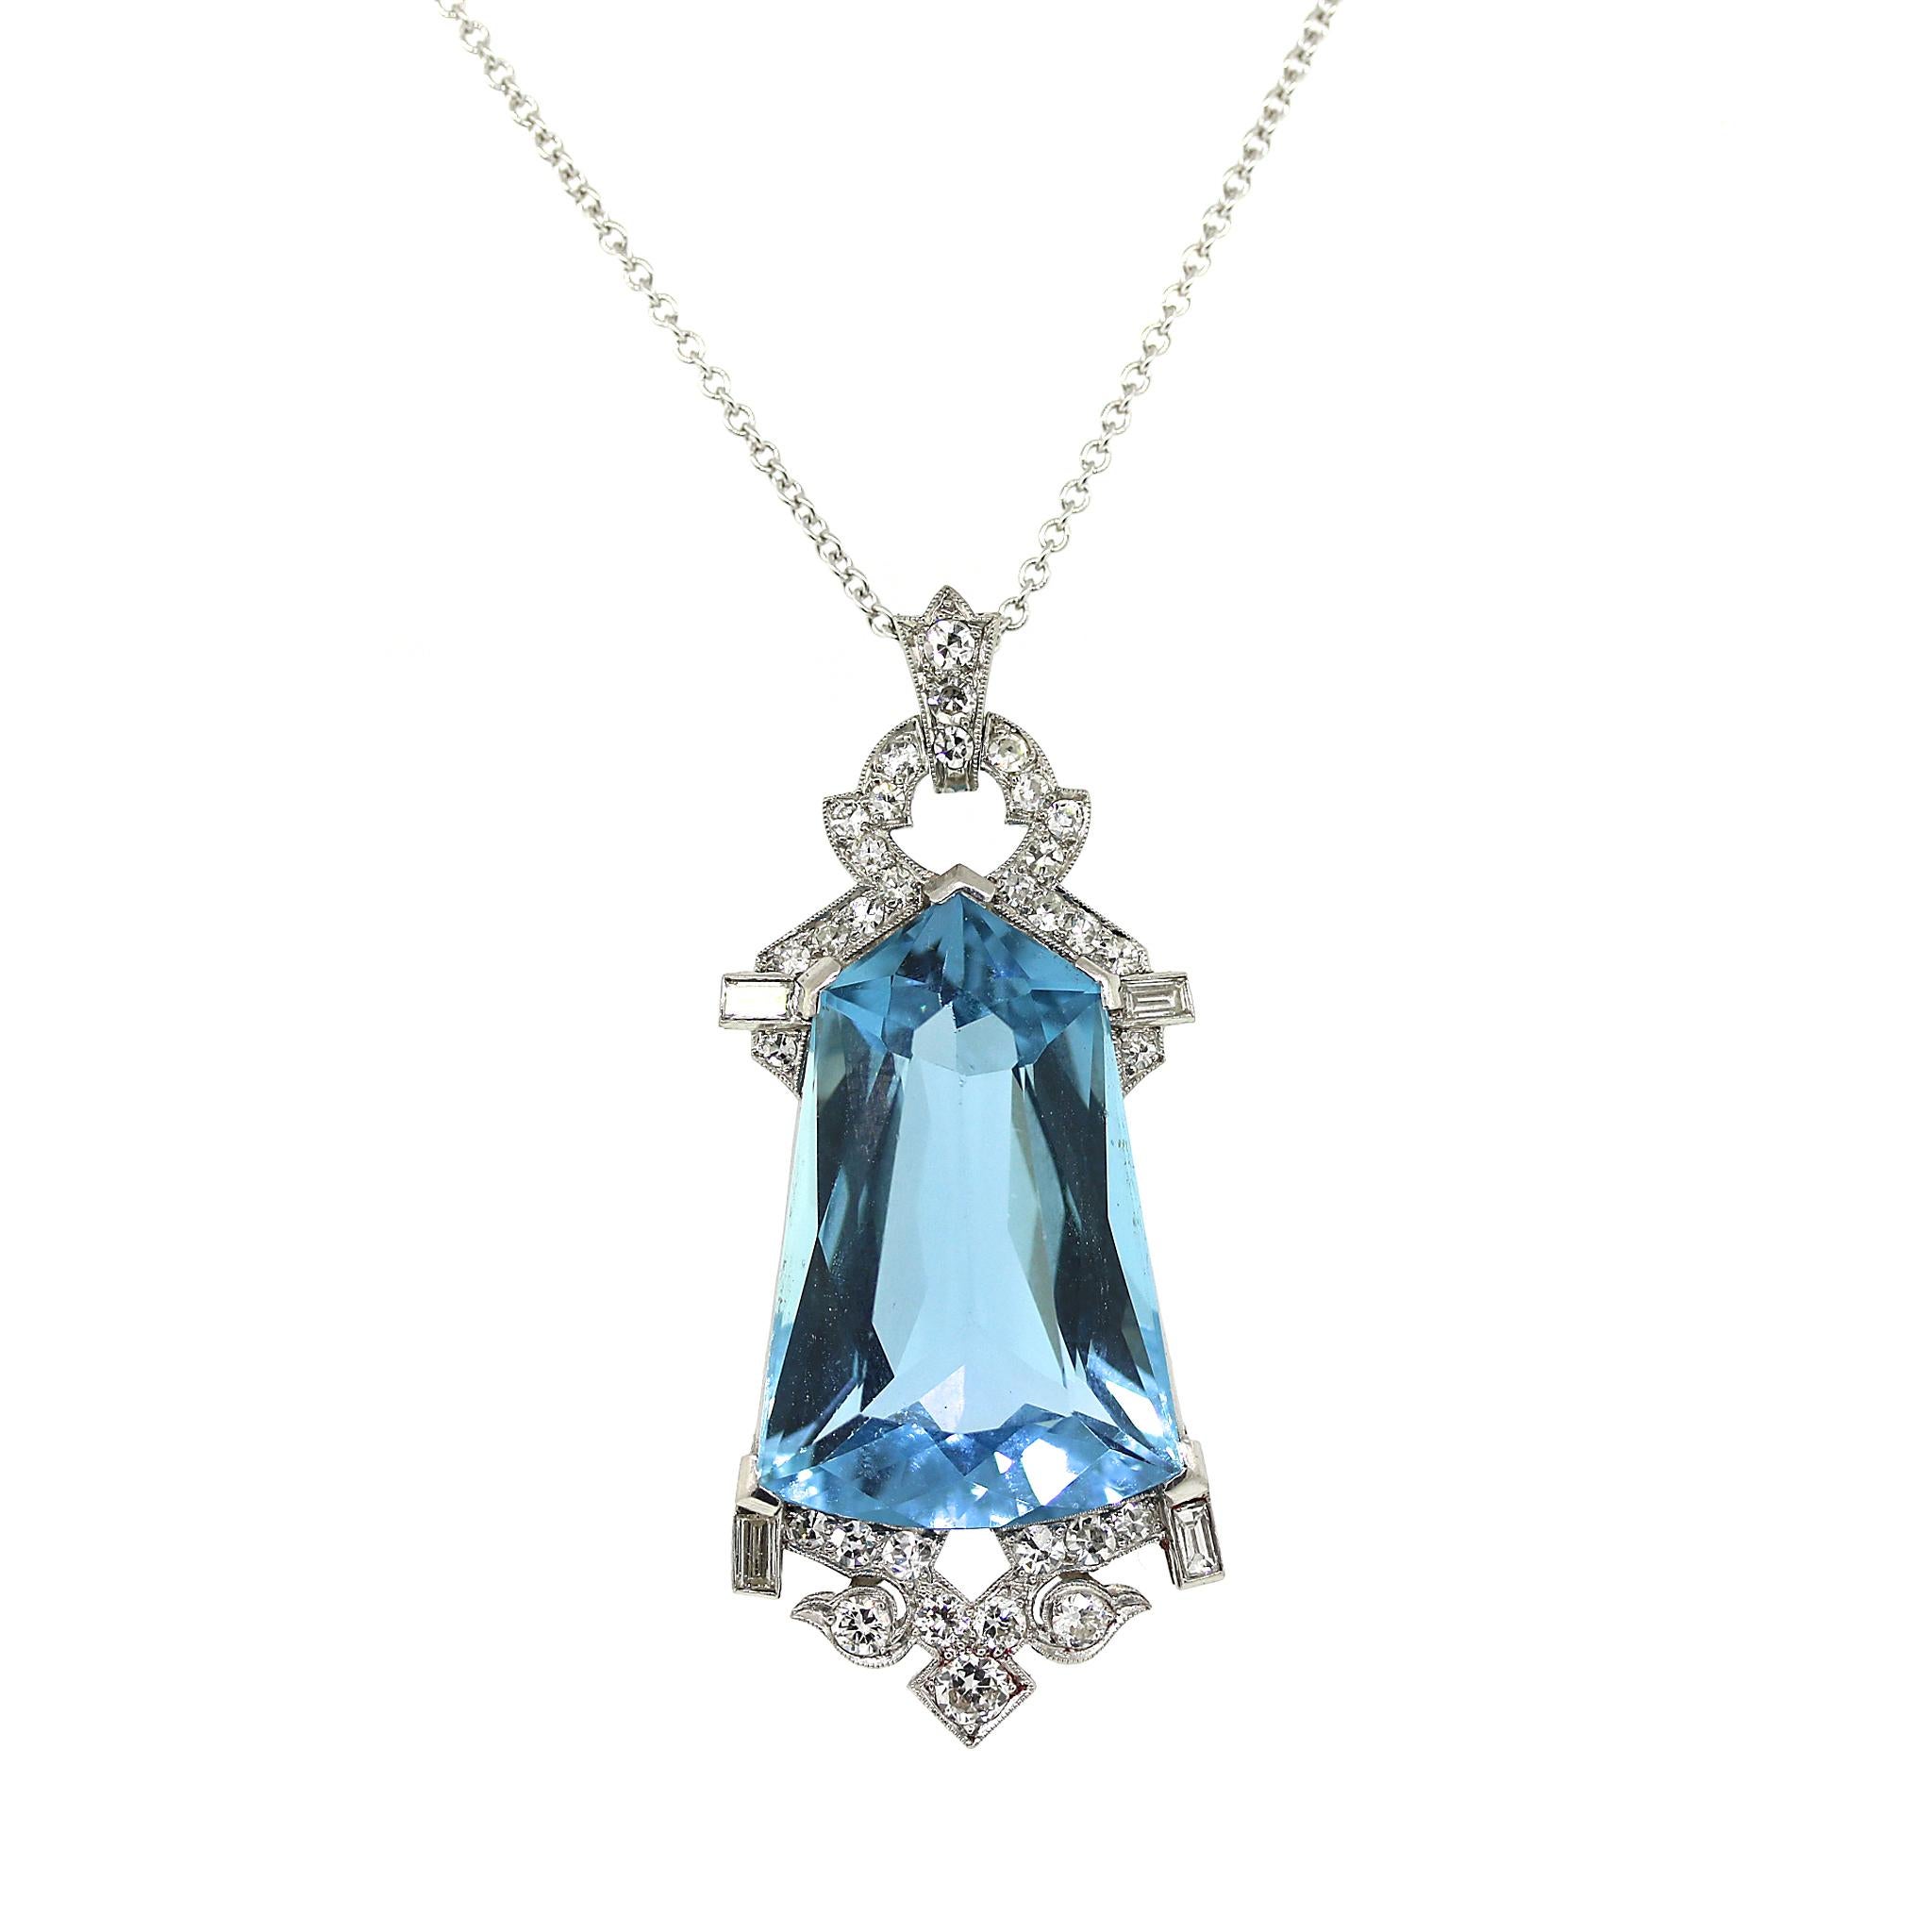 Platinum
Aquamarine: 21.00 tcw - approximately
Diamond: 2.8 ct twd
Pendant Length from Bale to Bottom: 1.75 inches
Total Weight: 8.99 grams